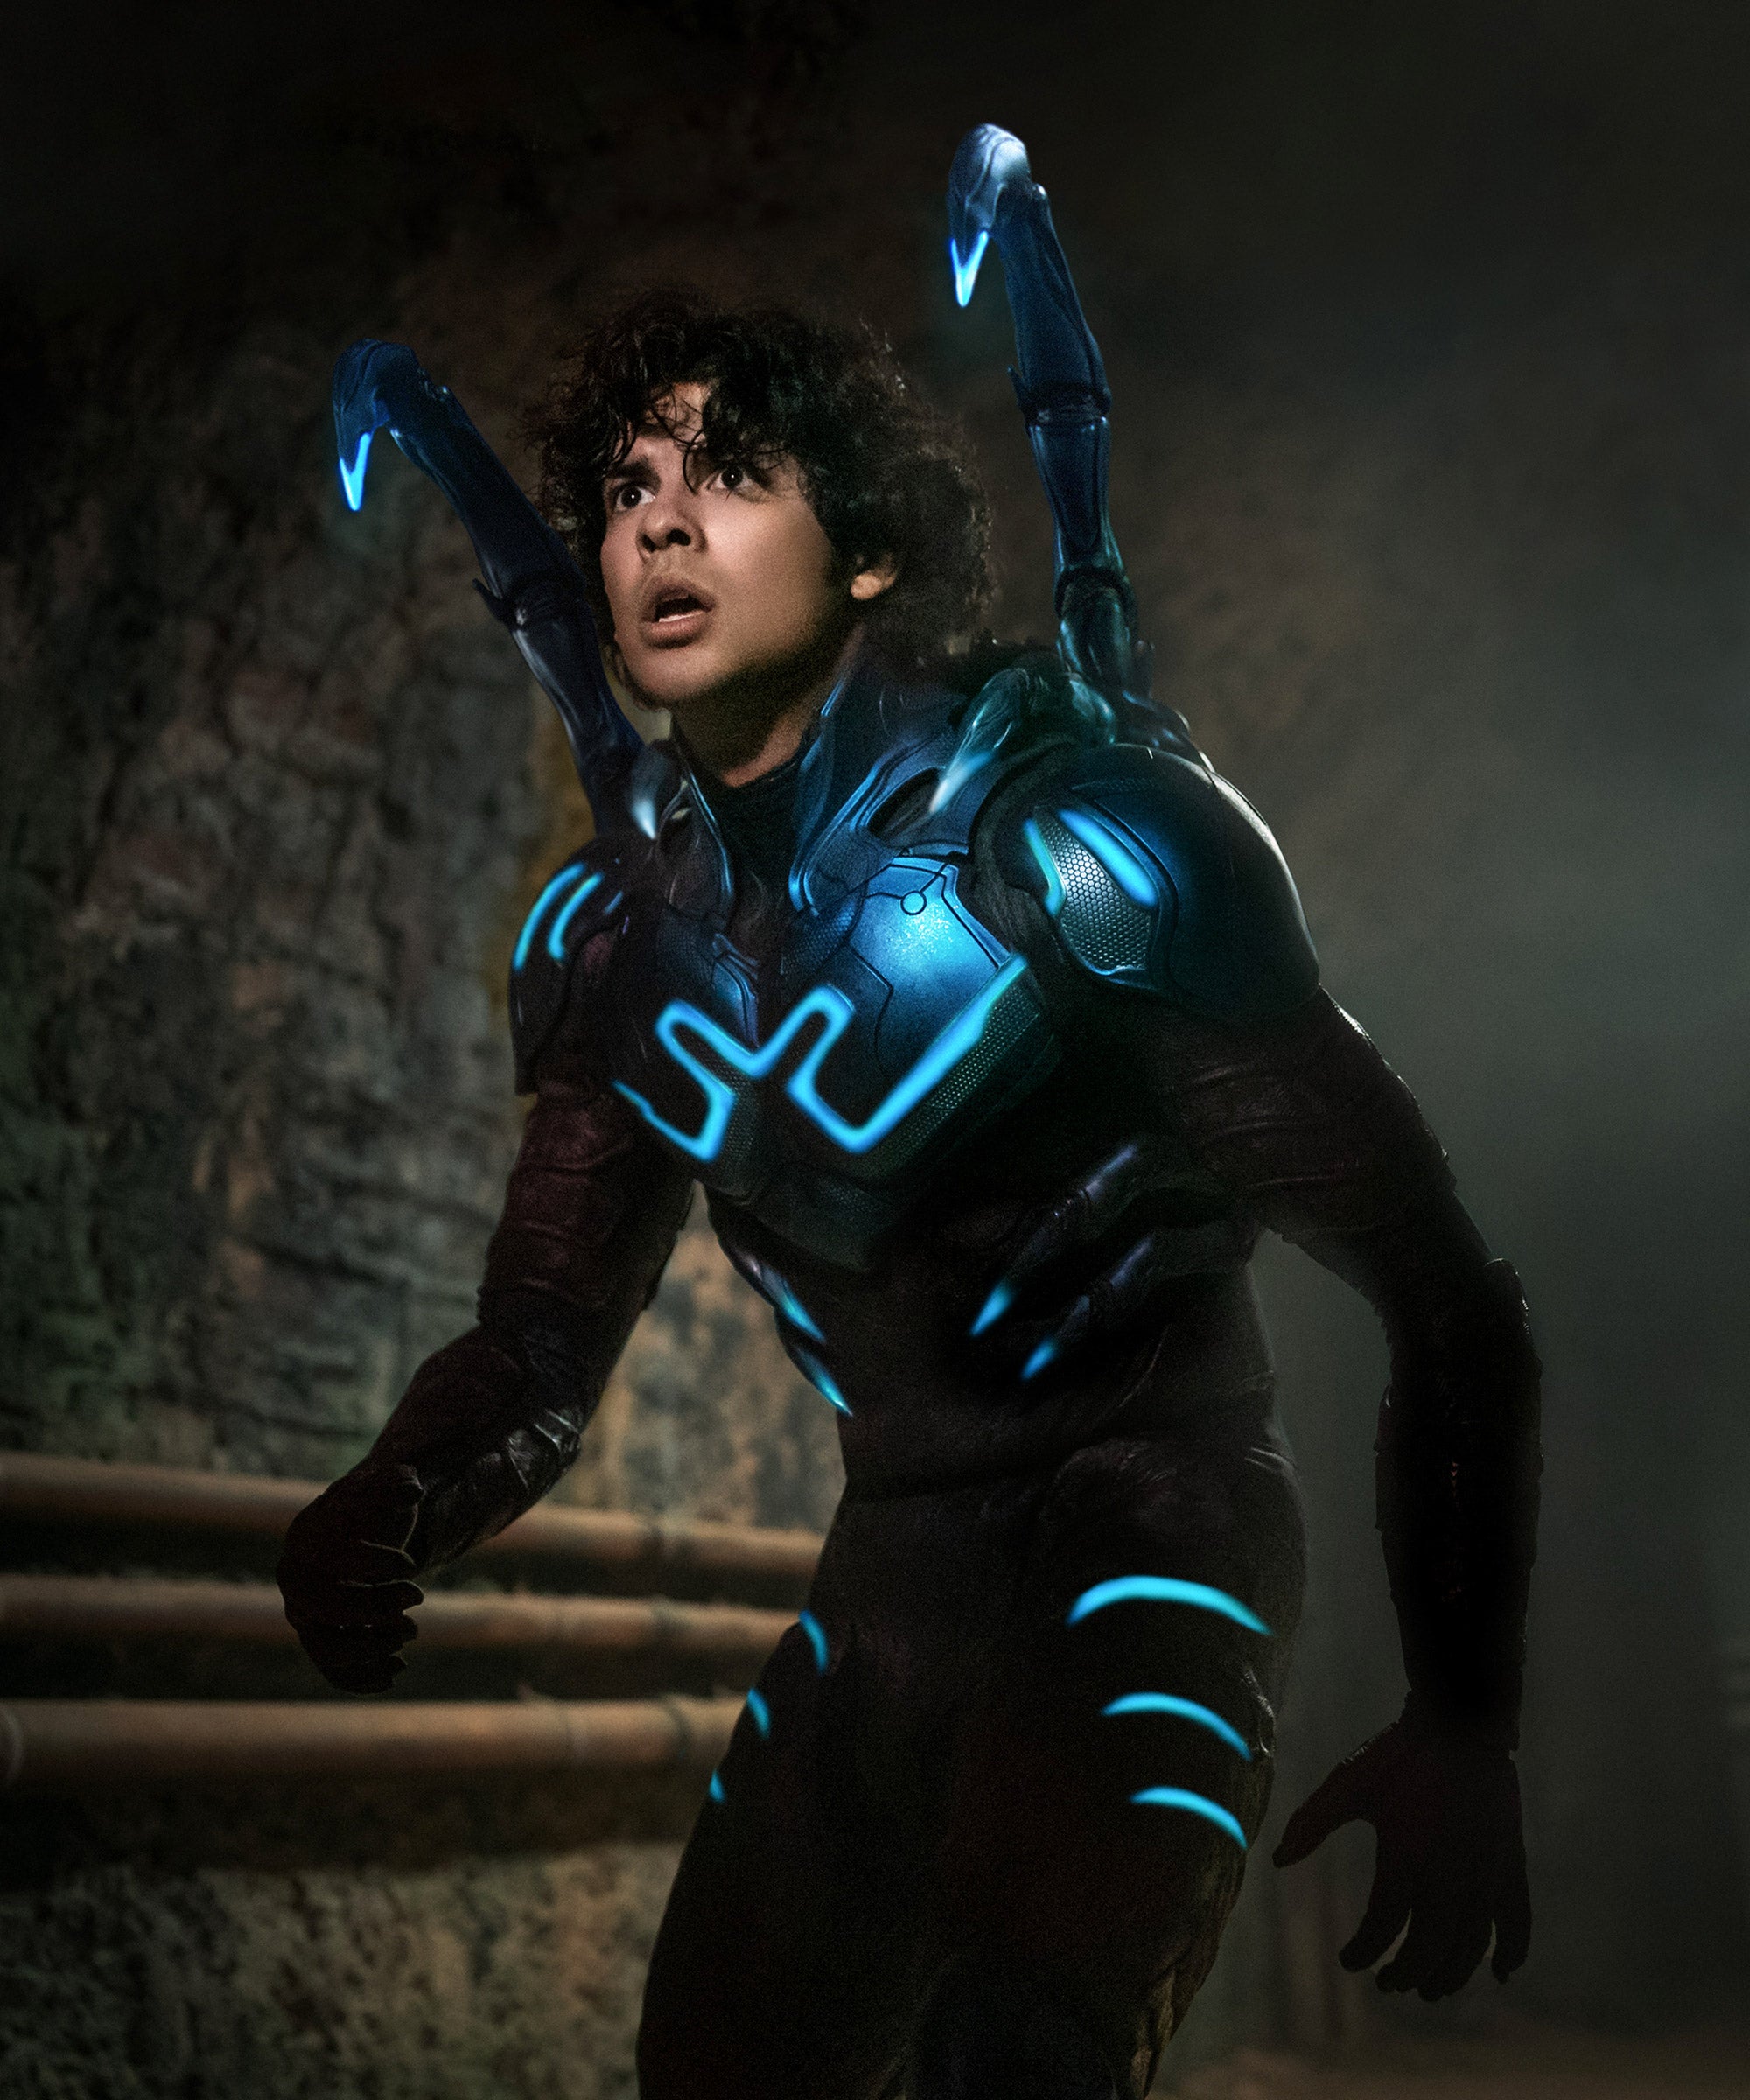 Early Blue Beetle box office tracking suggests $12-$17 million opening  weekend